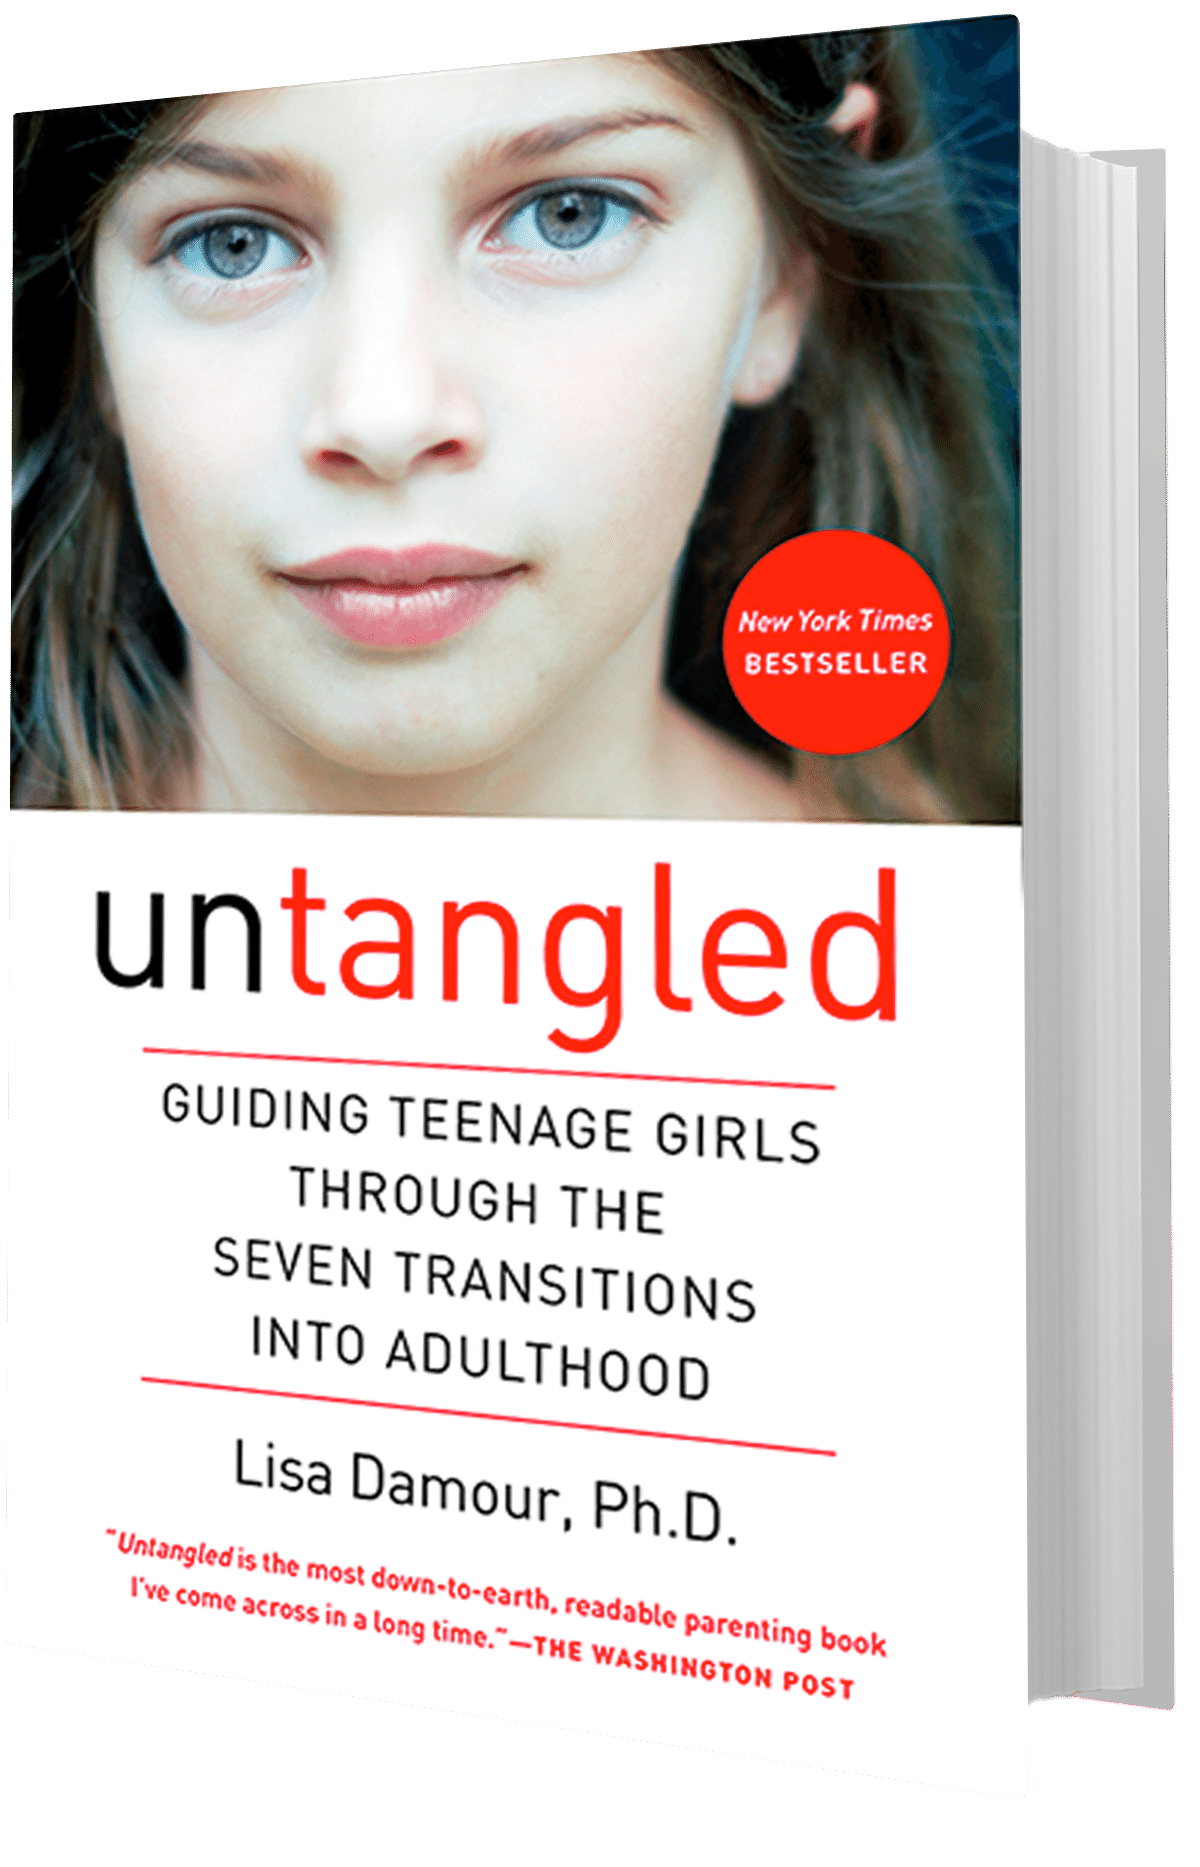 My Therapist's Book Club July 2021: Untangled: Guiding Teenage Girls  Through the Seven Transitions into Adulthood by Lisa Damour, Ph.D.